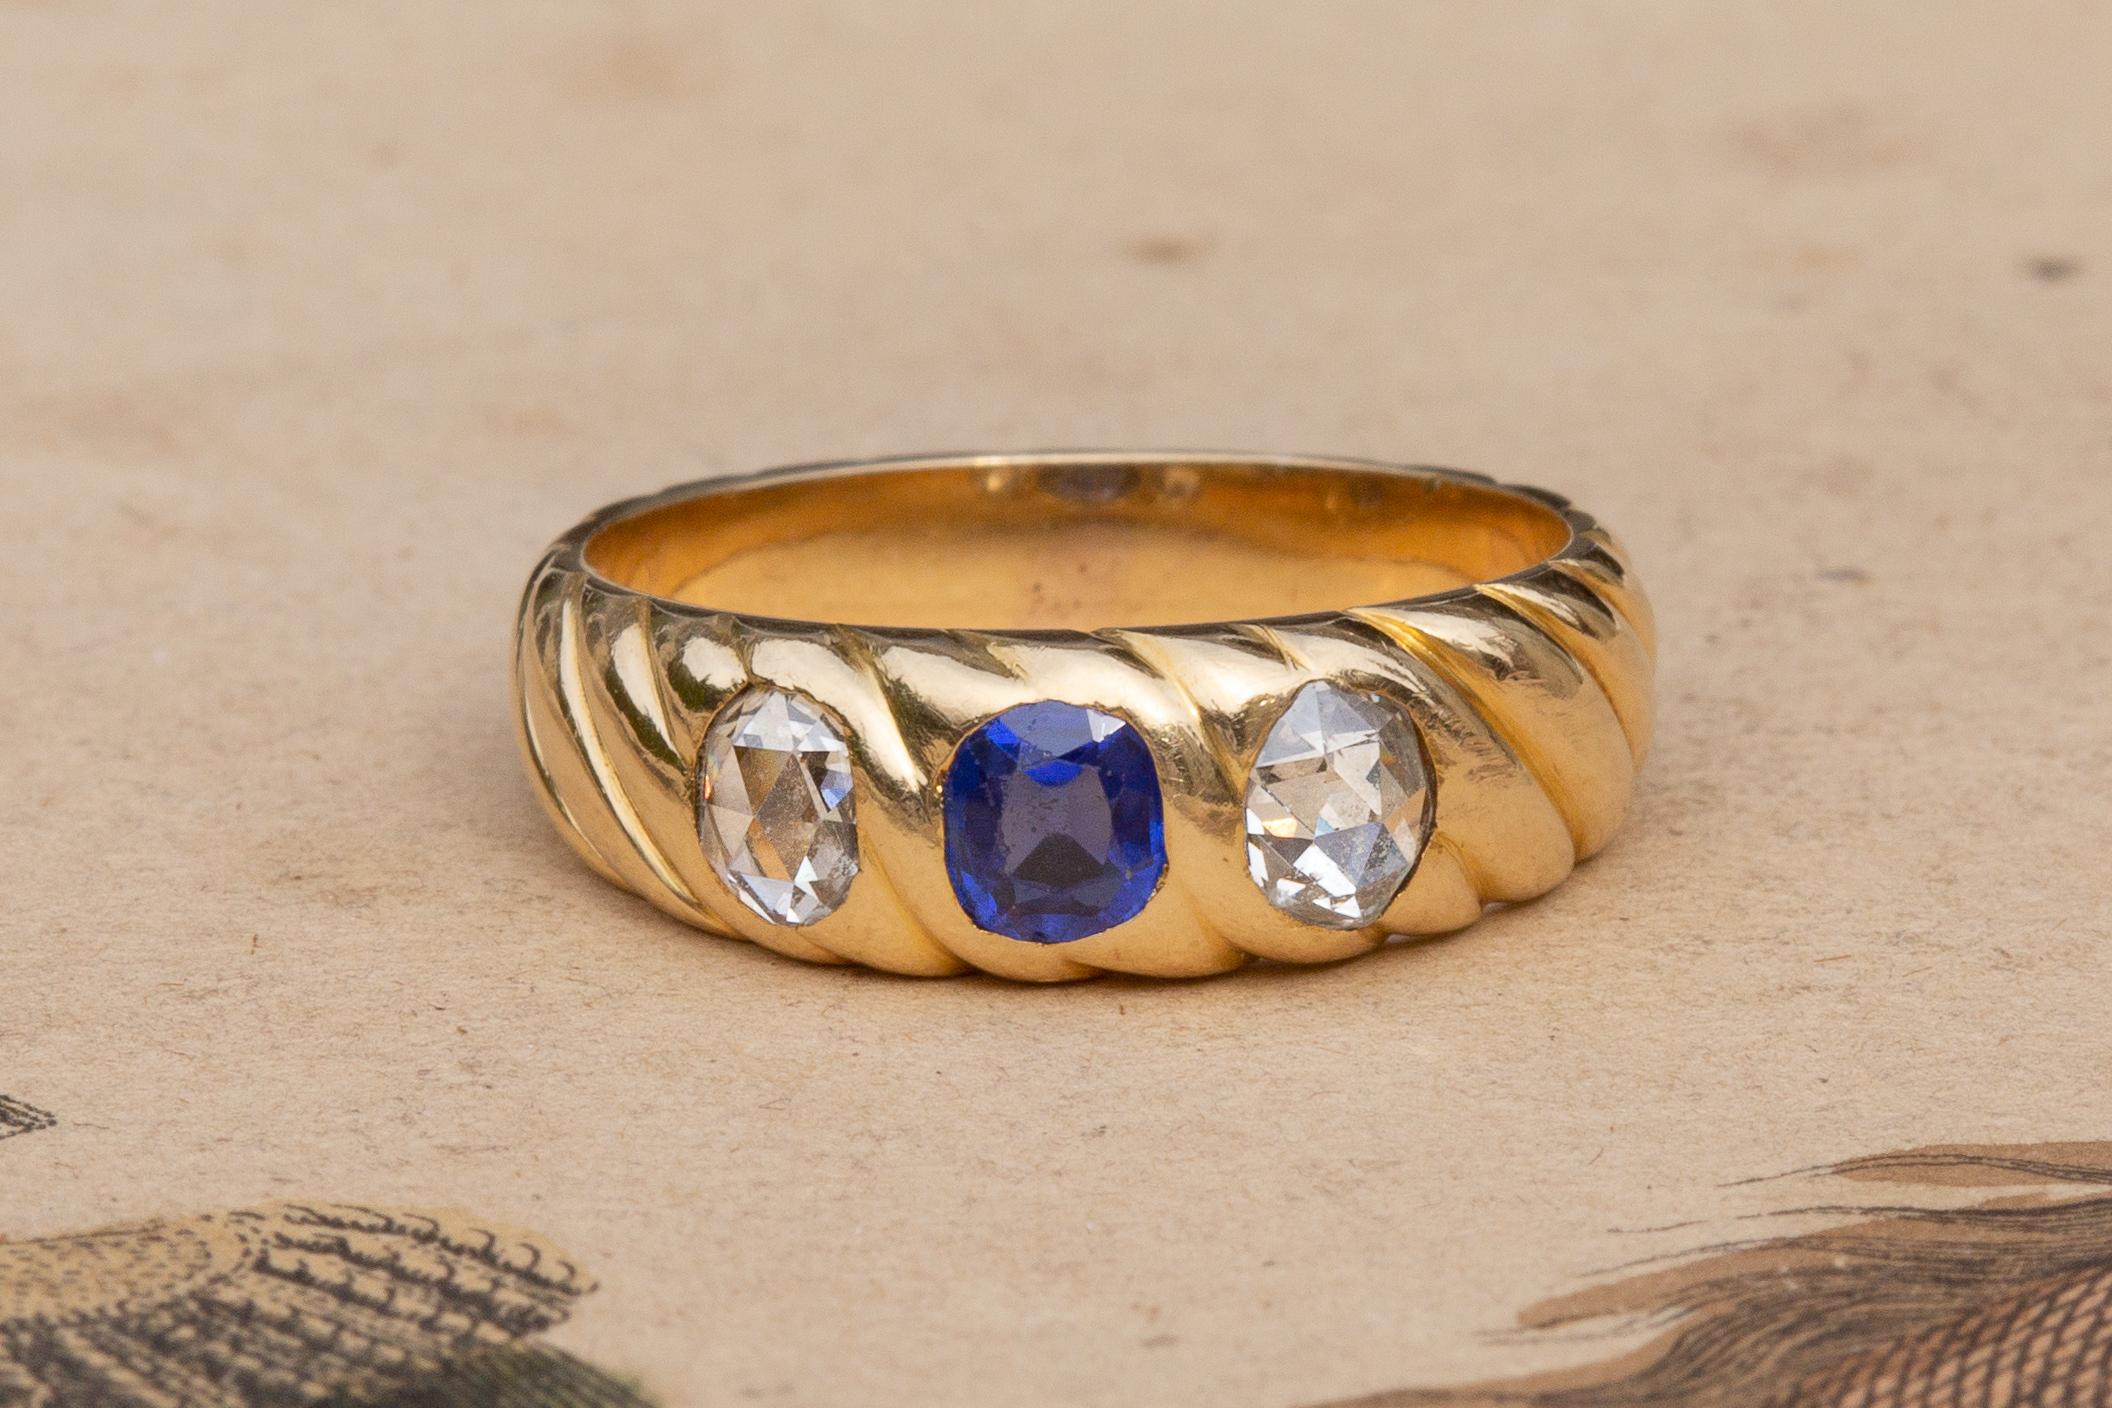 Stunning Victorian Heavy 18K Gold Sapphire and Diamond Trilogy Ring

A unique French heavy gold three stone ring dating to the late 19th century, circa 1890. The twisted and tapered rope hoop is beautifully crafted in 18K gold and features a vibrant